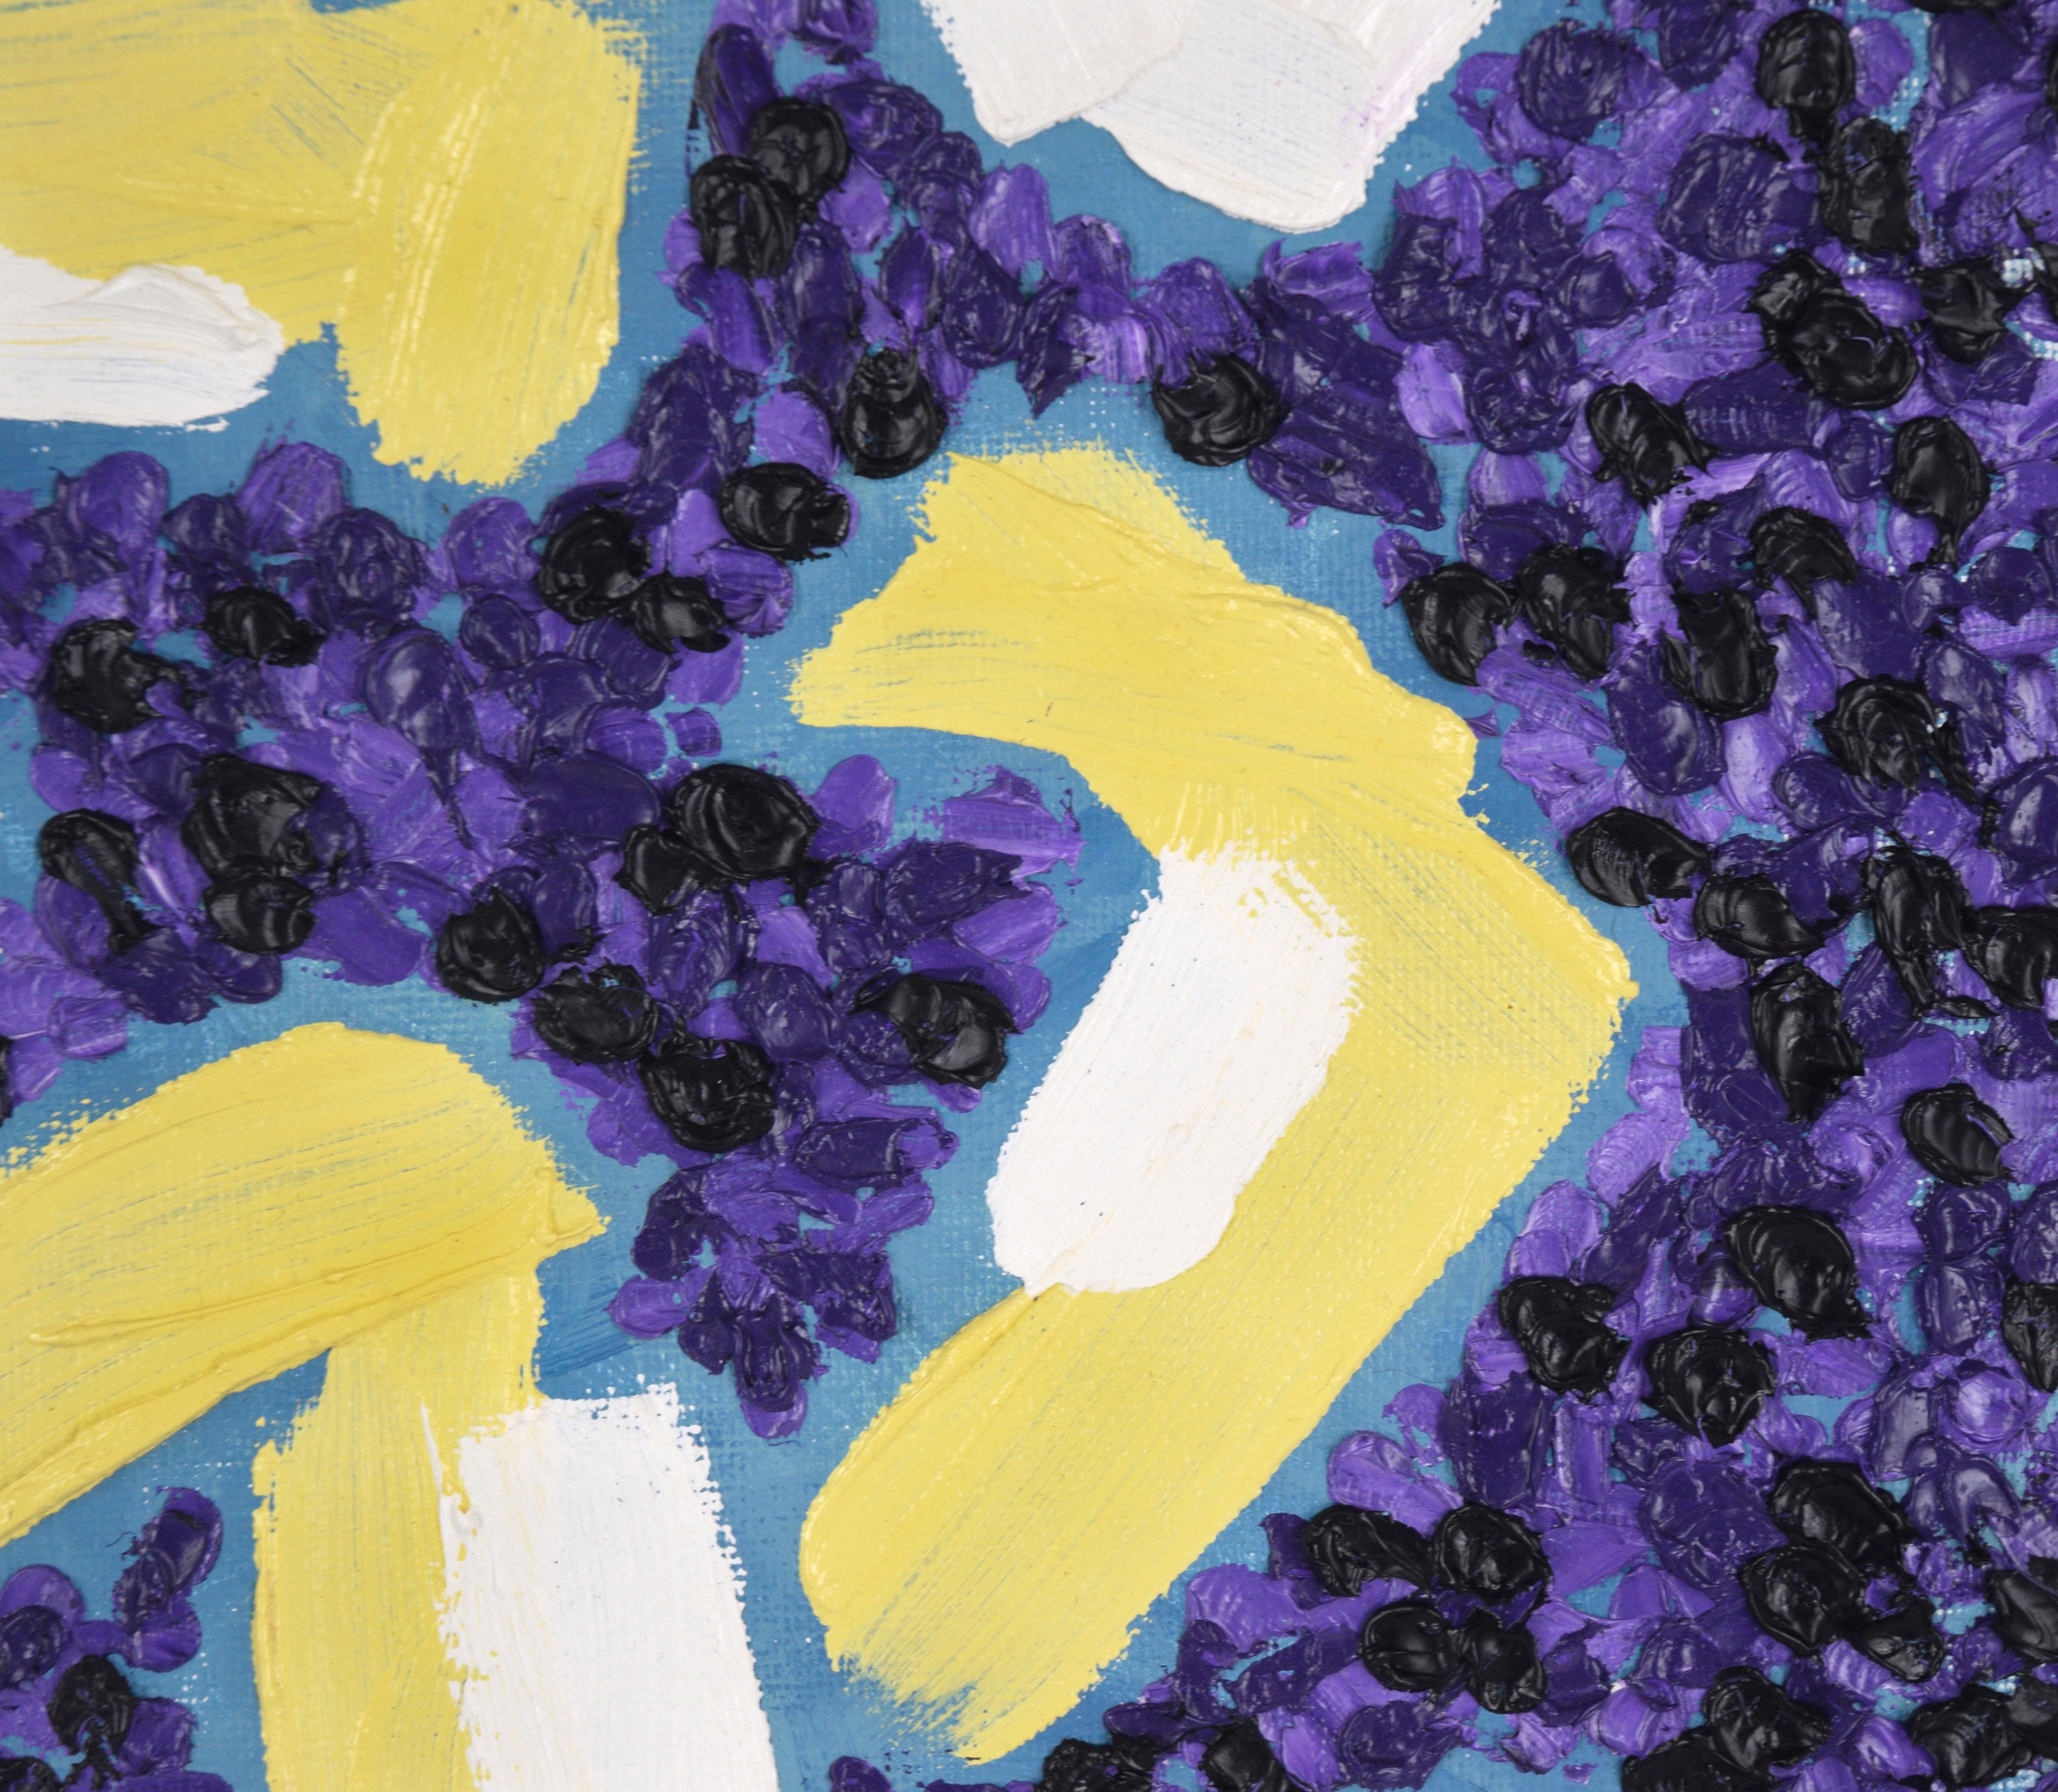 Richly textured abstract composition by California artist Devon Brockopp-Hammer (American, b. 1986). Large bold swatches of white and yellow float against a blur background. Surrounding the large strokes are several layers of heavily textured purple